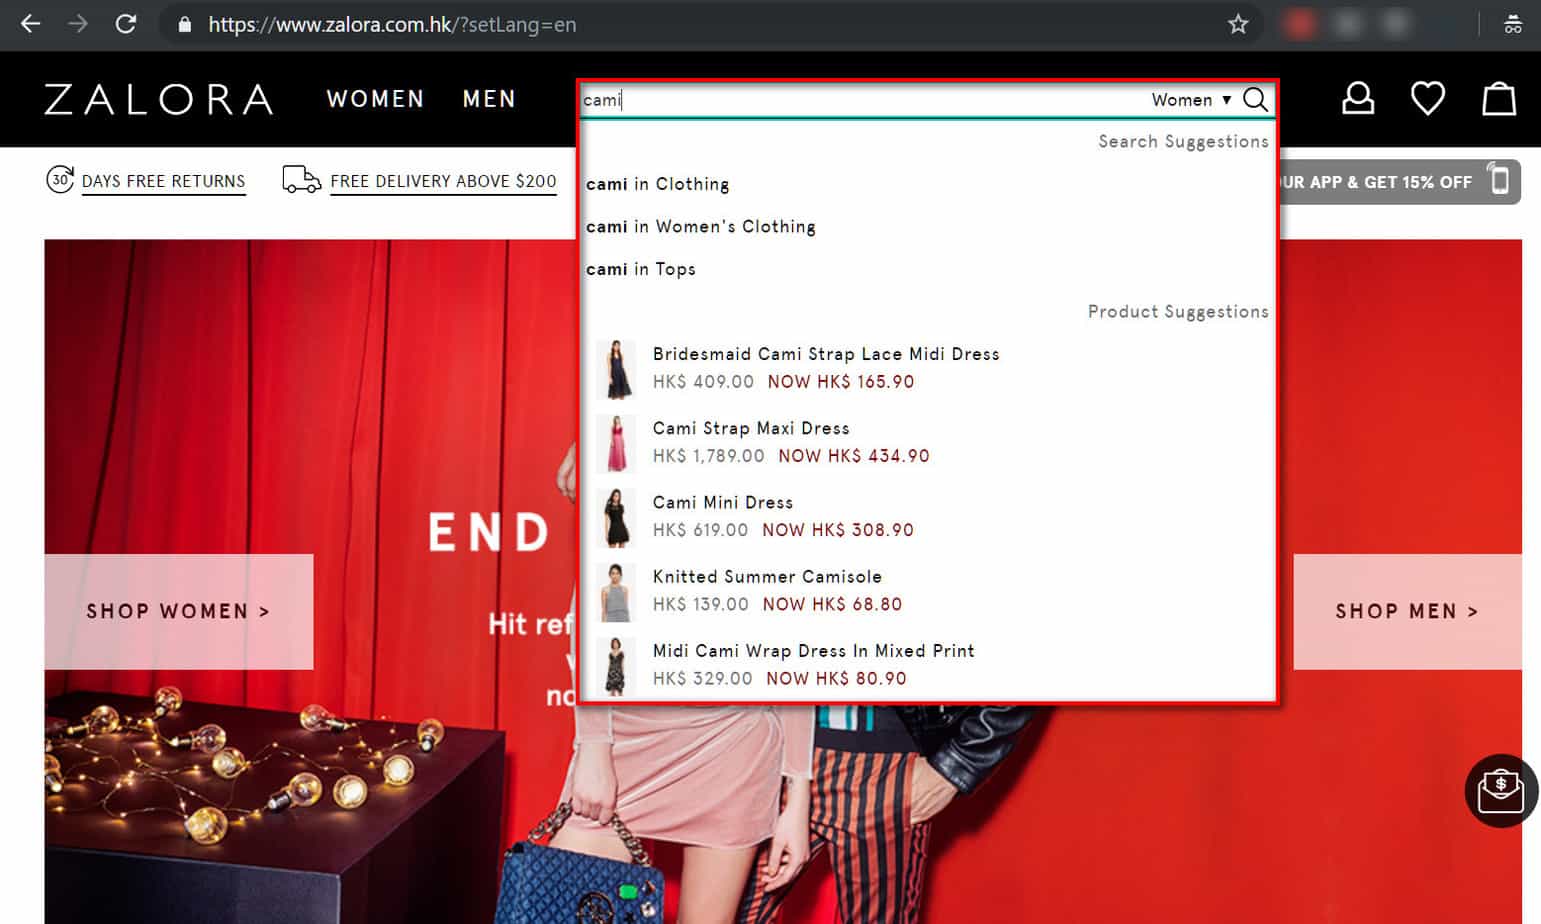 The site search on zalora.com.hk, with auto suggestions and images